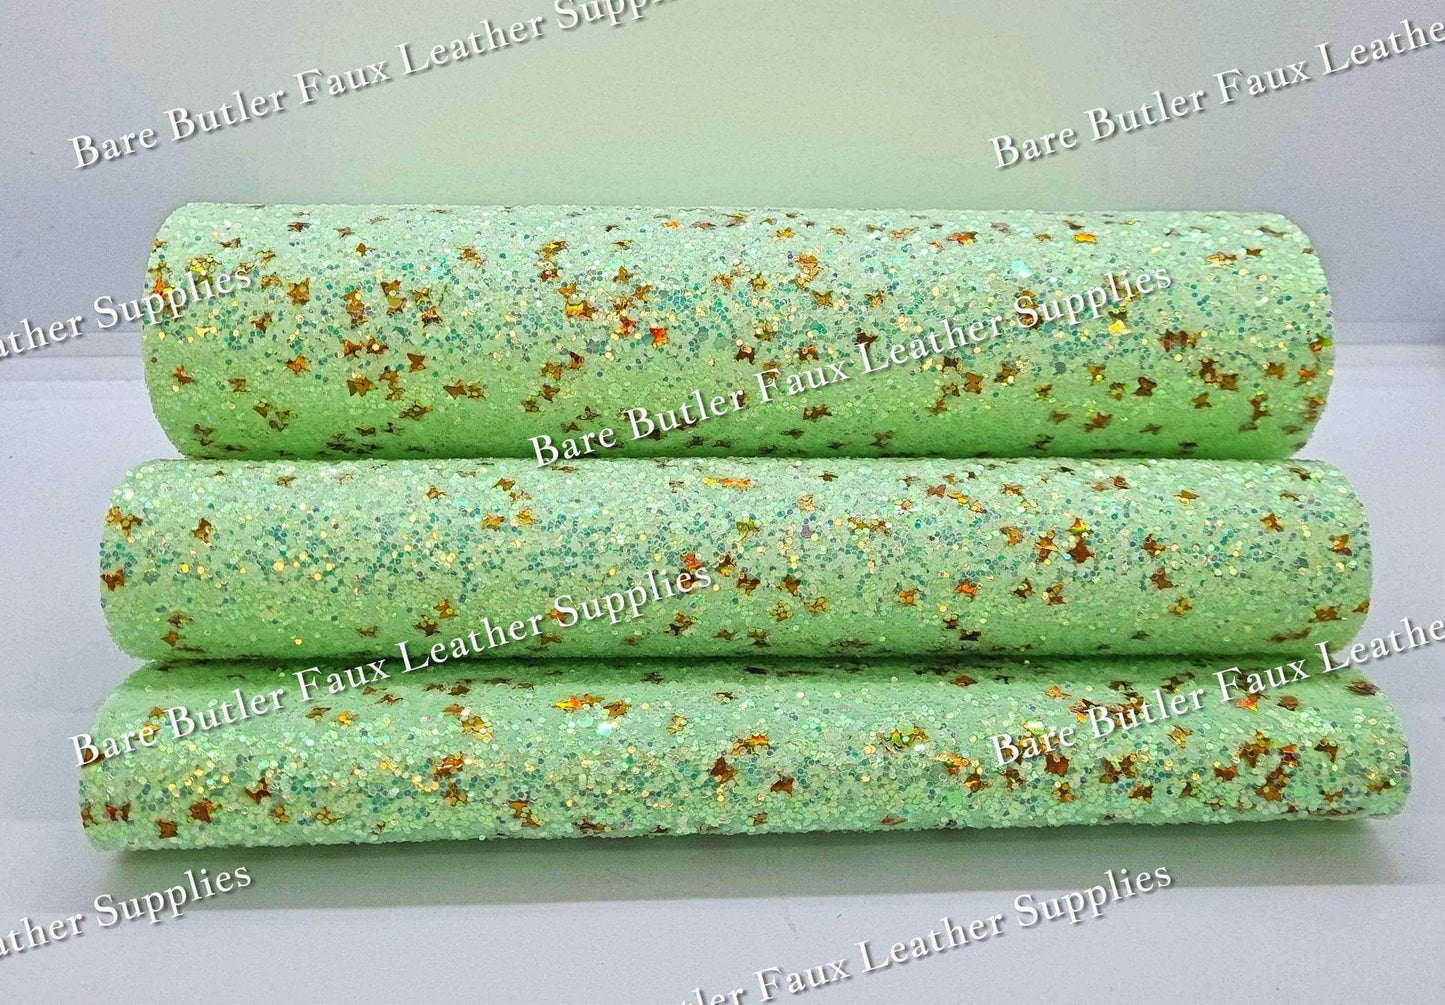 Chunky Glitter - Green/Gold Shimmer - Chunky, Faux, Faux Leather, glitter, gold, green, leather, leatherette, sparkles - Bare Butler Faux Leather Supplies 